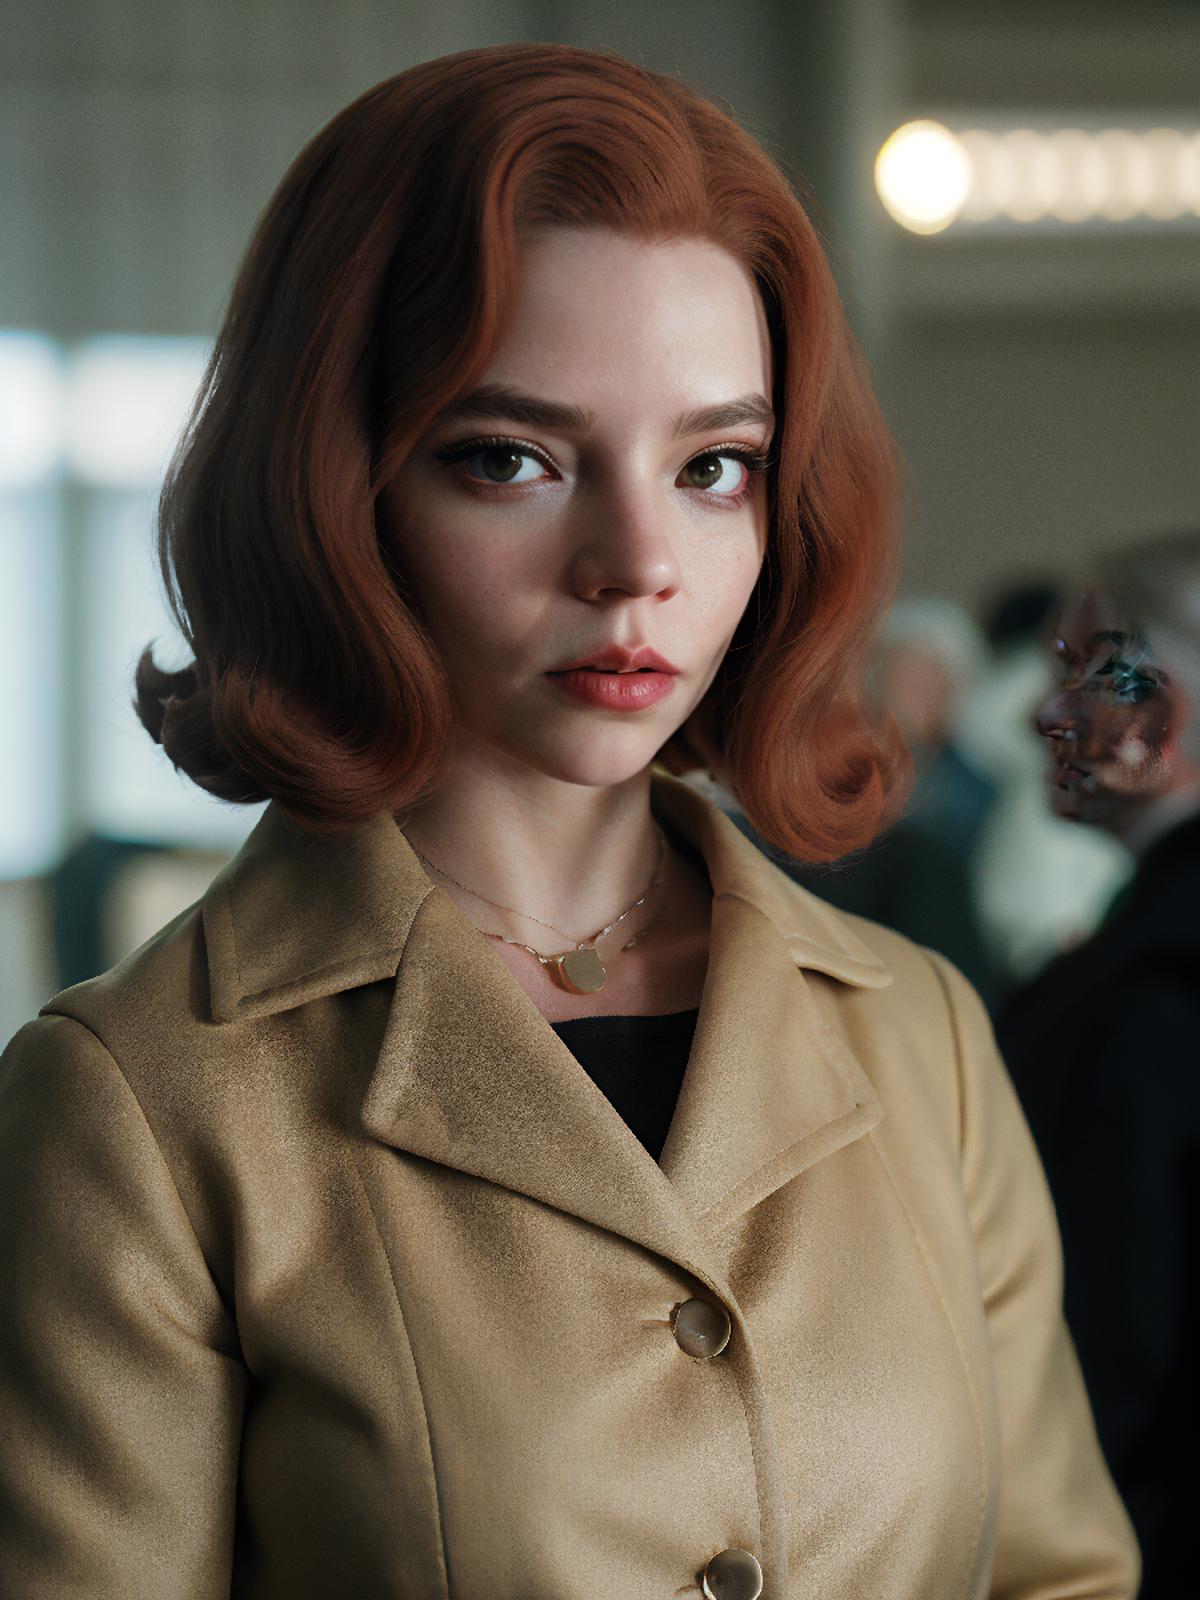 Yet another Anya Taylor Joy image by damocles_aaa